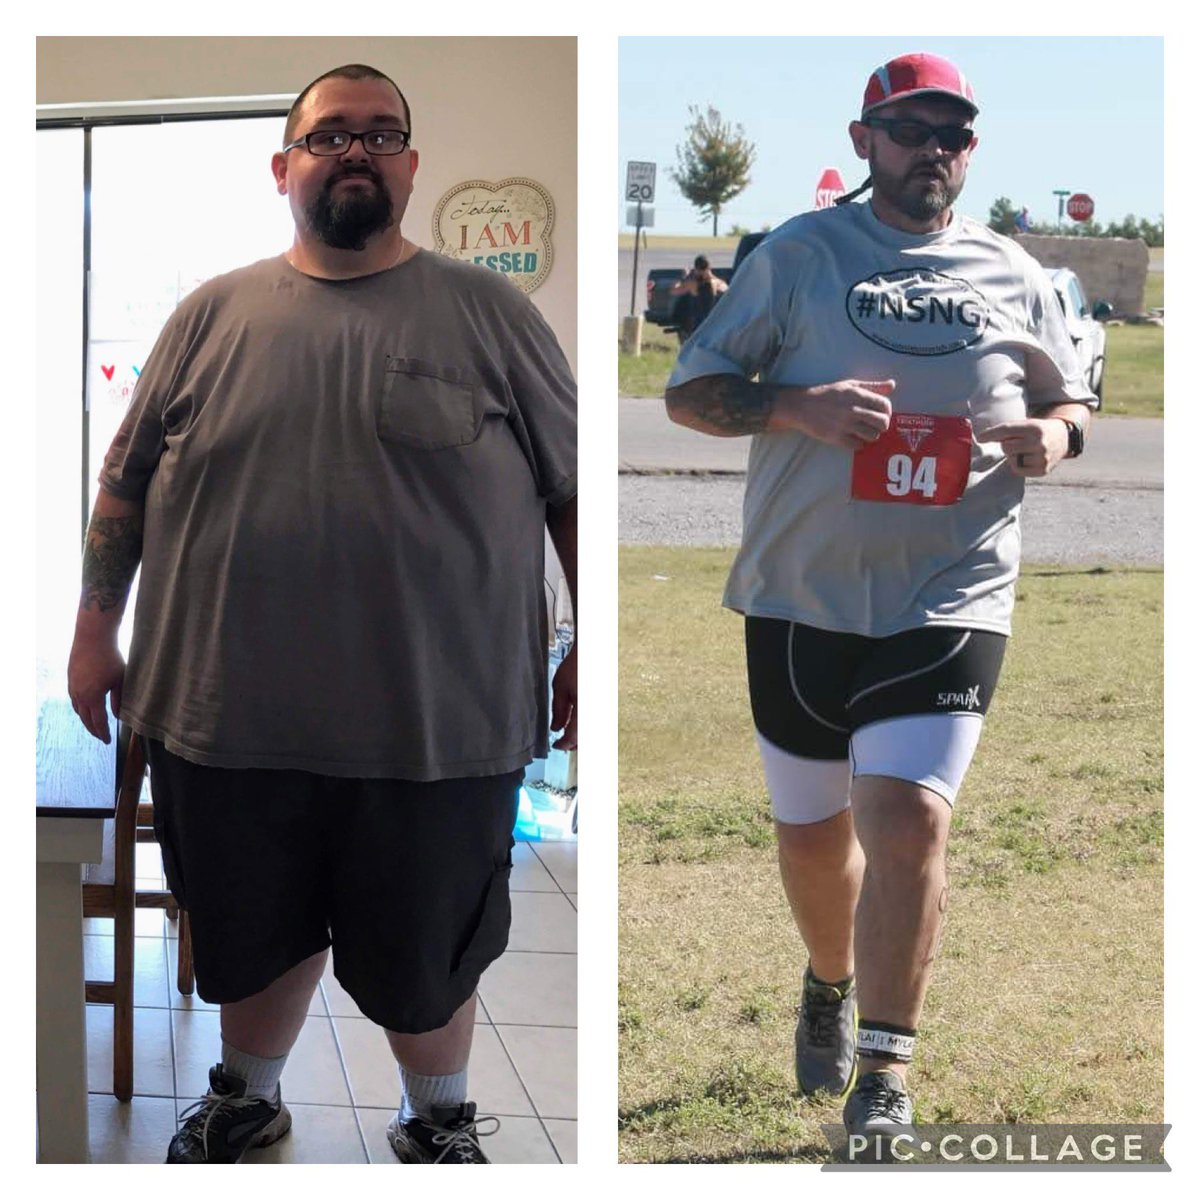 Facelift Friday I am doing an oldie. I think it's about a year ago? Triathlon finished 2nd in my group (nevermind there was only 2 in my group) 😉Was a great experience and the before is not even close to my heaviest. Now to get back to training for those Ironman goals #nsng